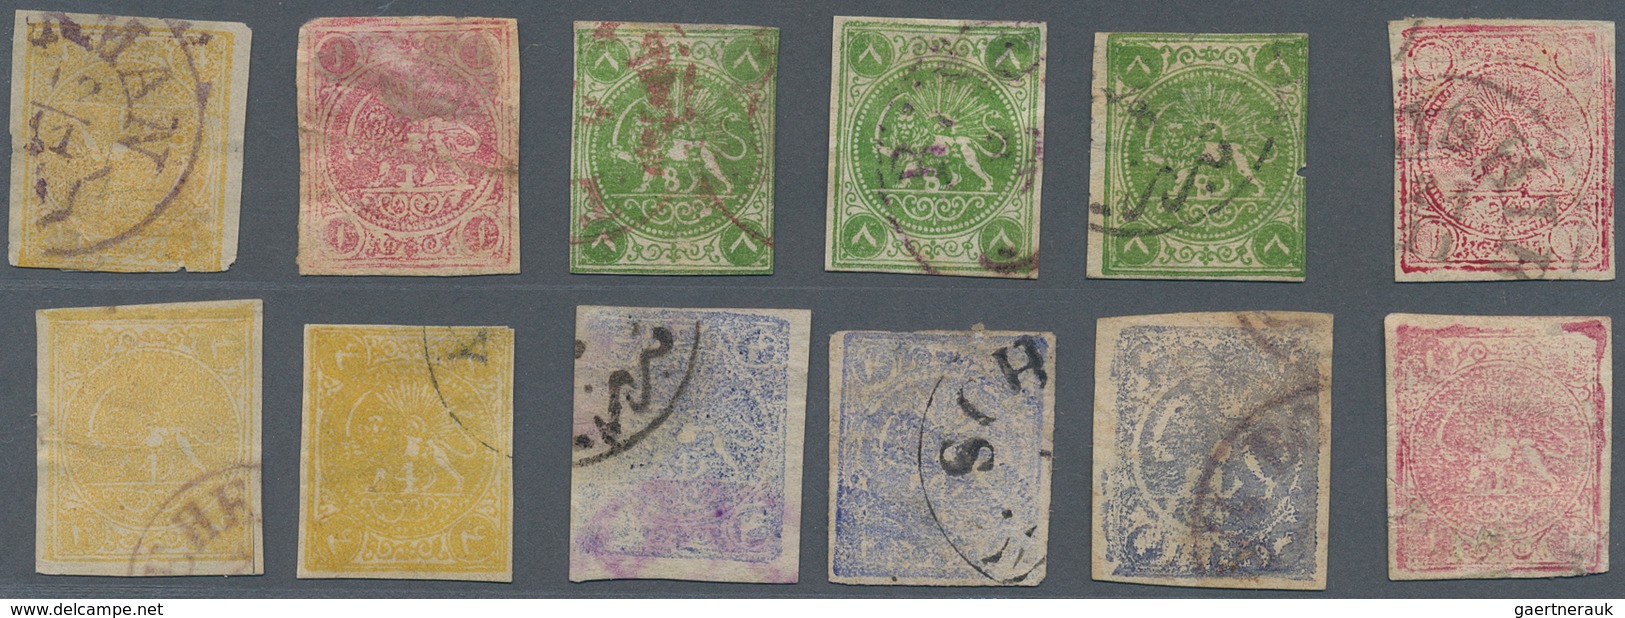 Iran: 1868-78, Lions Issue 21 Stamps Clear Cancelled, Some Faults And Thins, Still Fine For Study - Iran